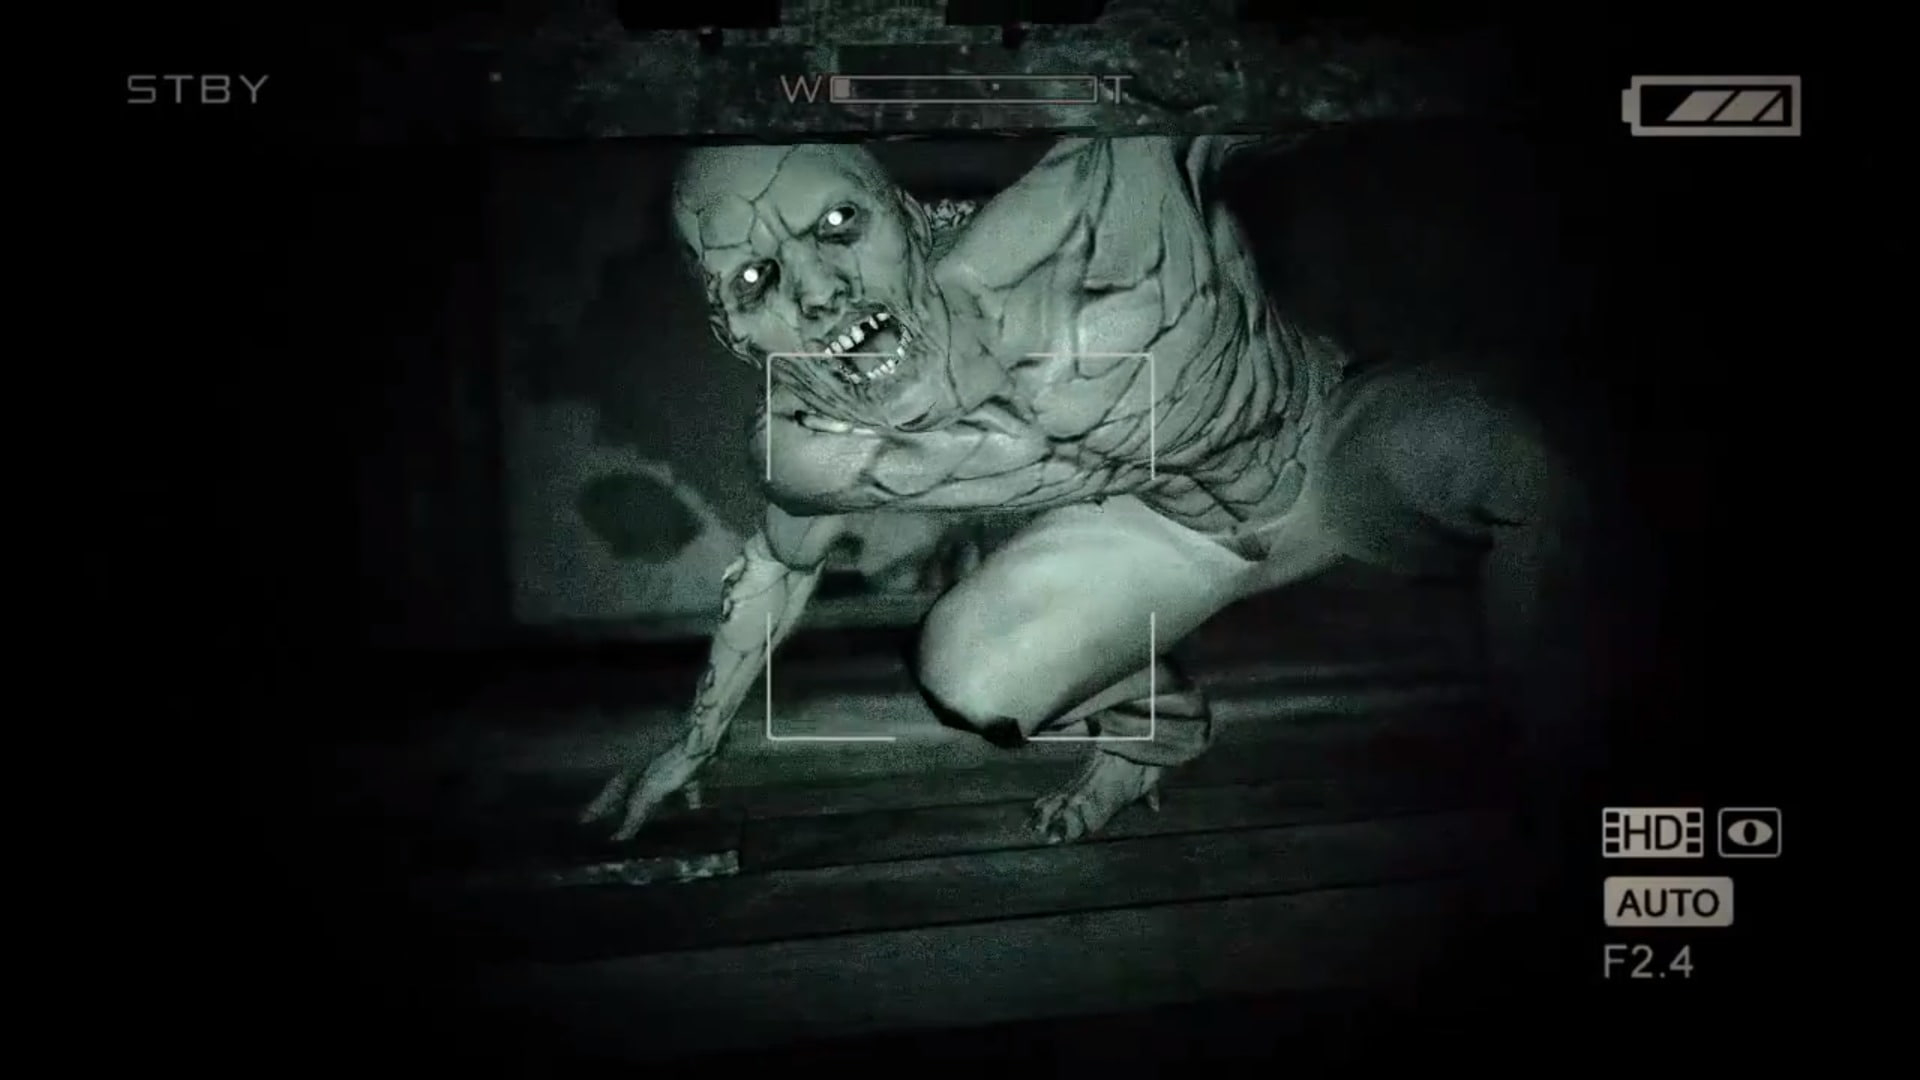 Wallpaper Video Game, Outlast 1920x1080px 1080px